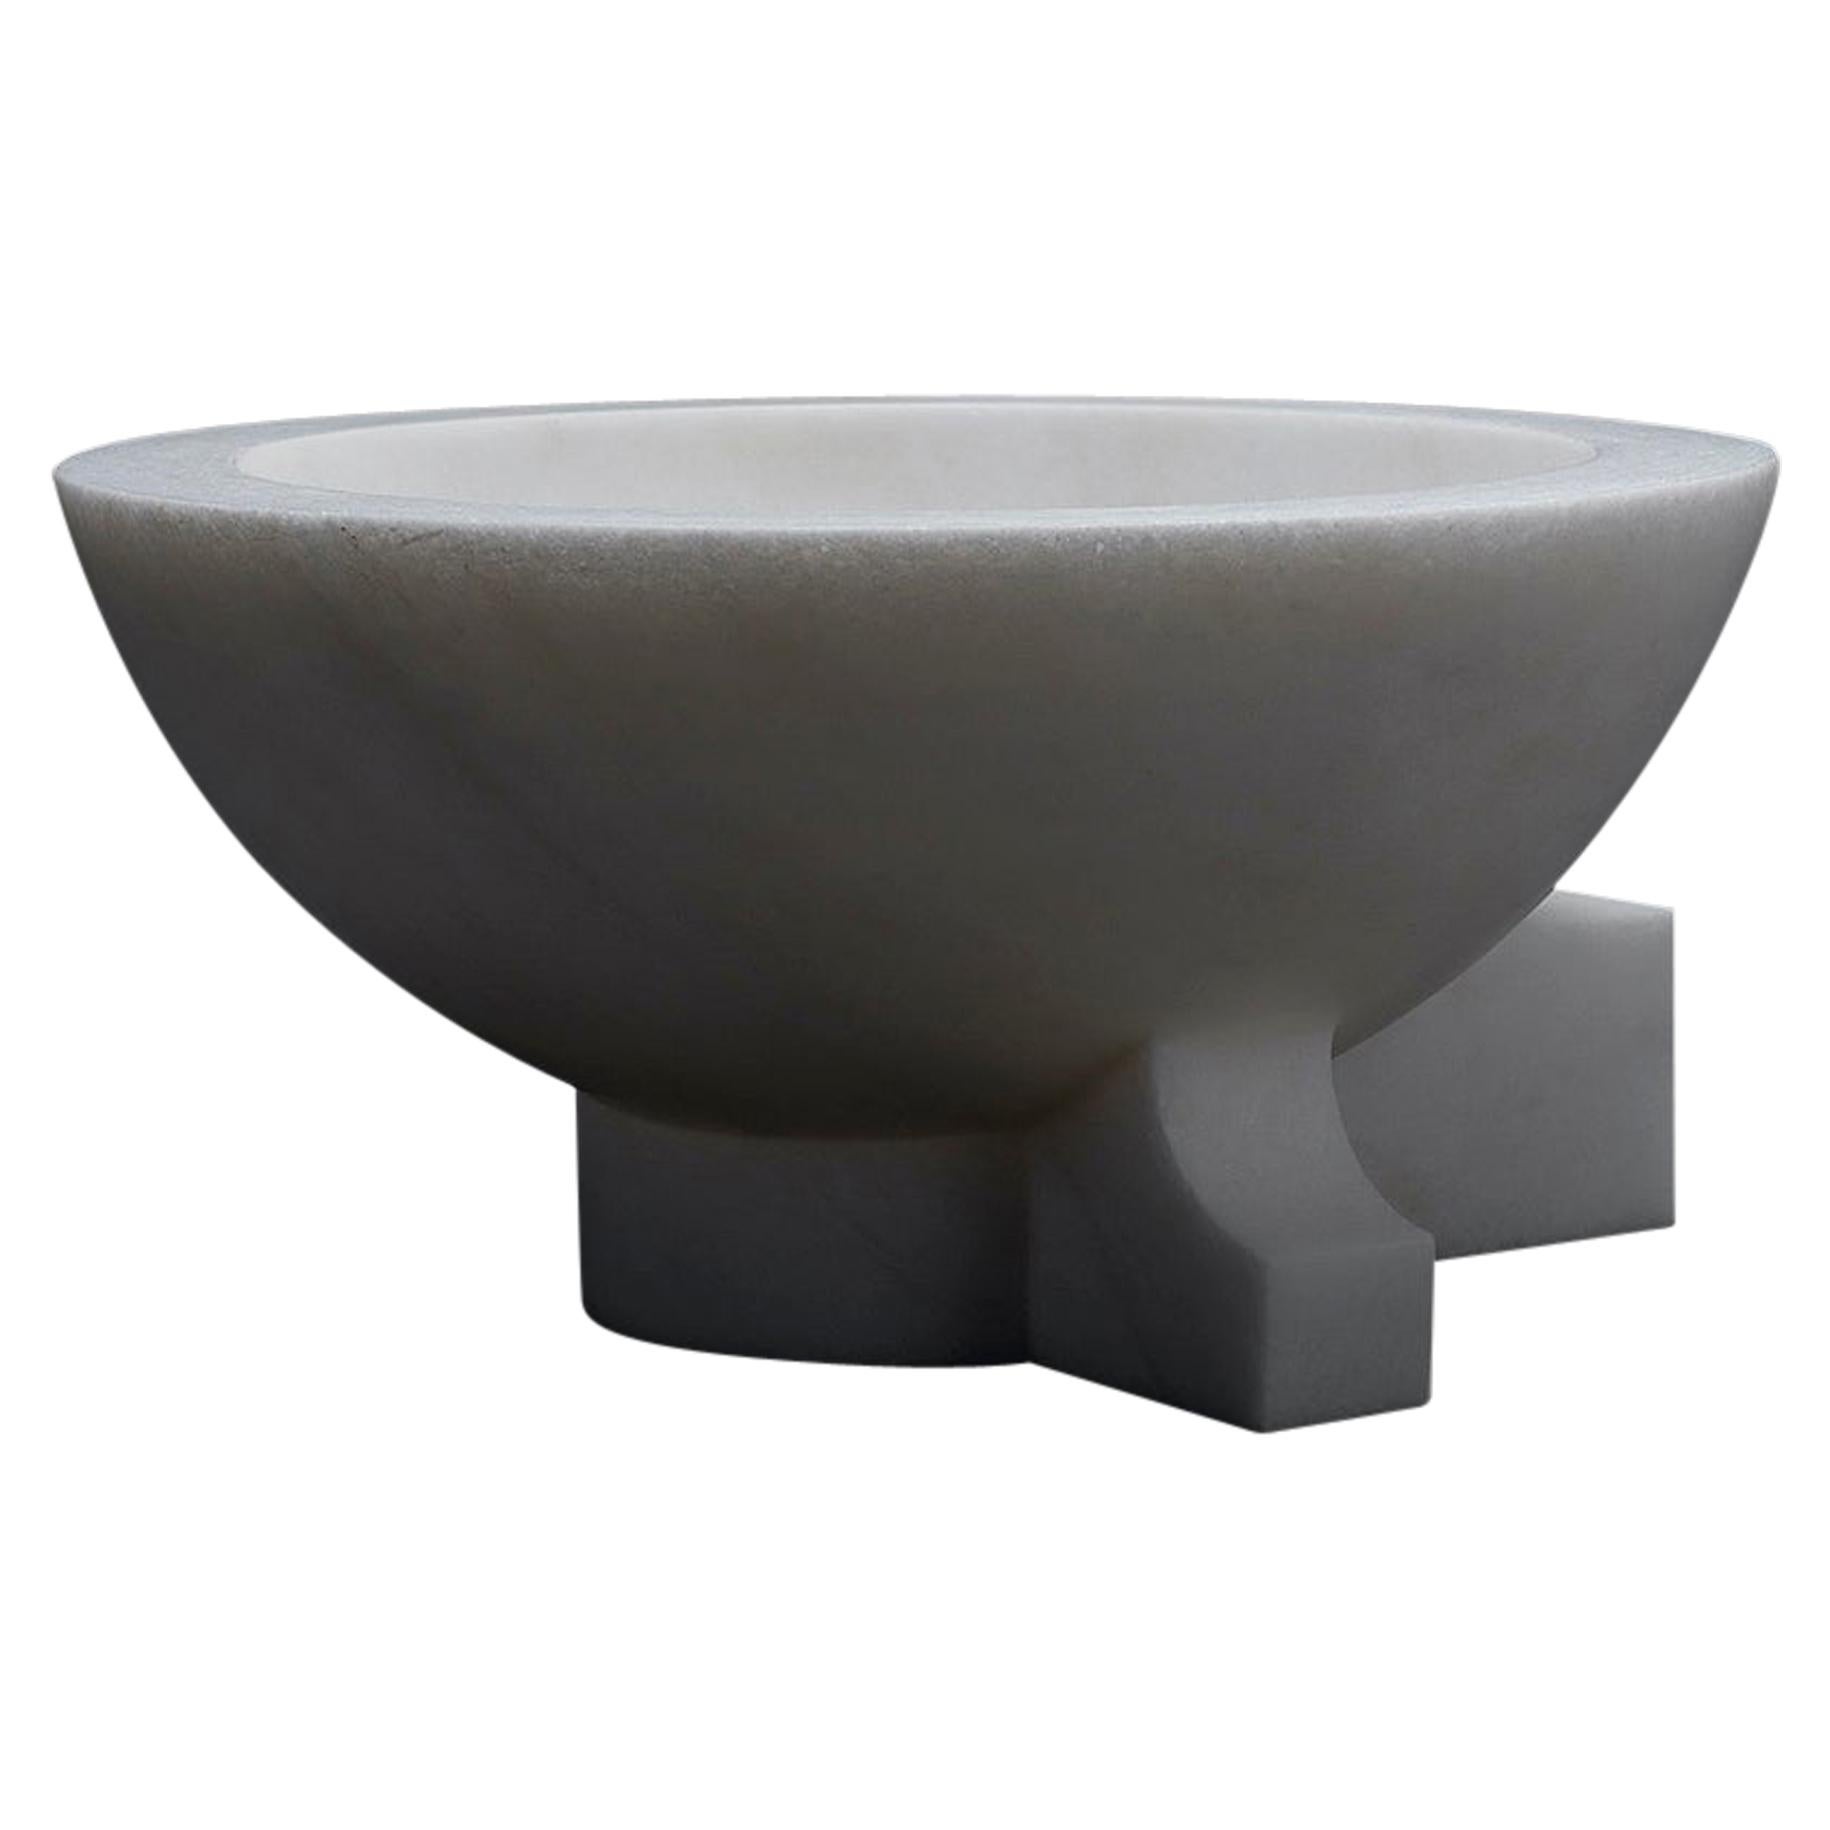 Hand Carved Alabaster "Galeana" Tall Bowl by Jorge Diego Etienne